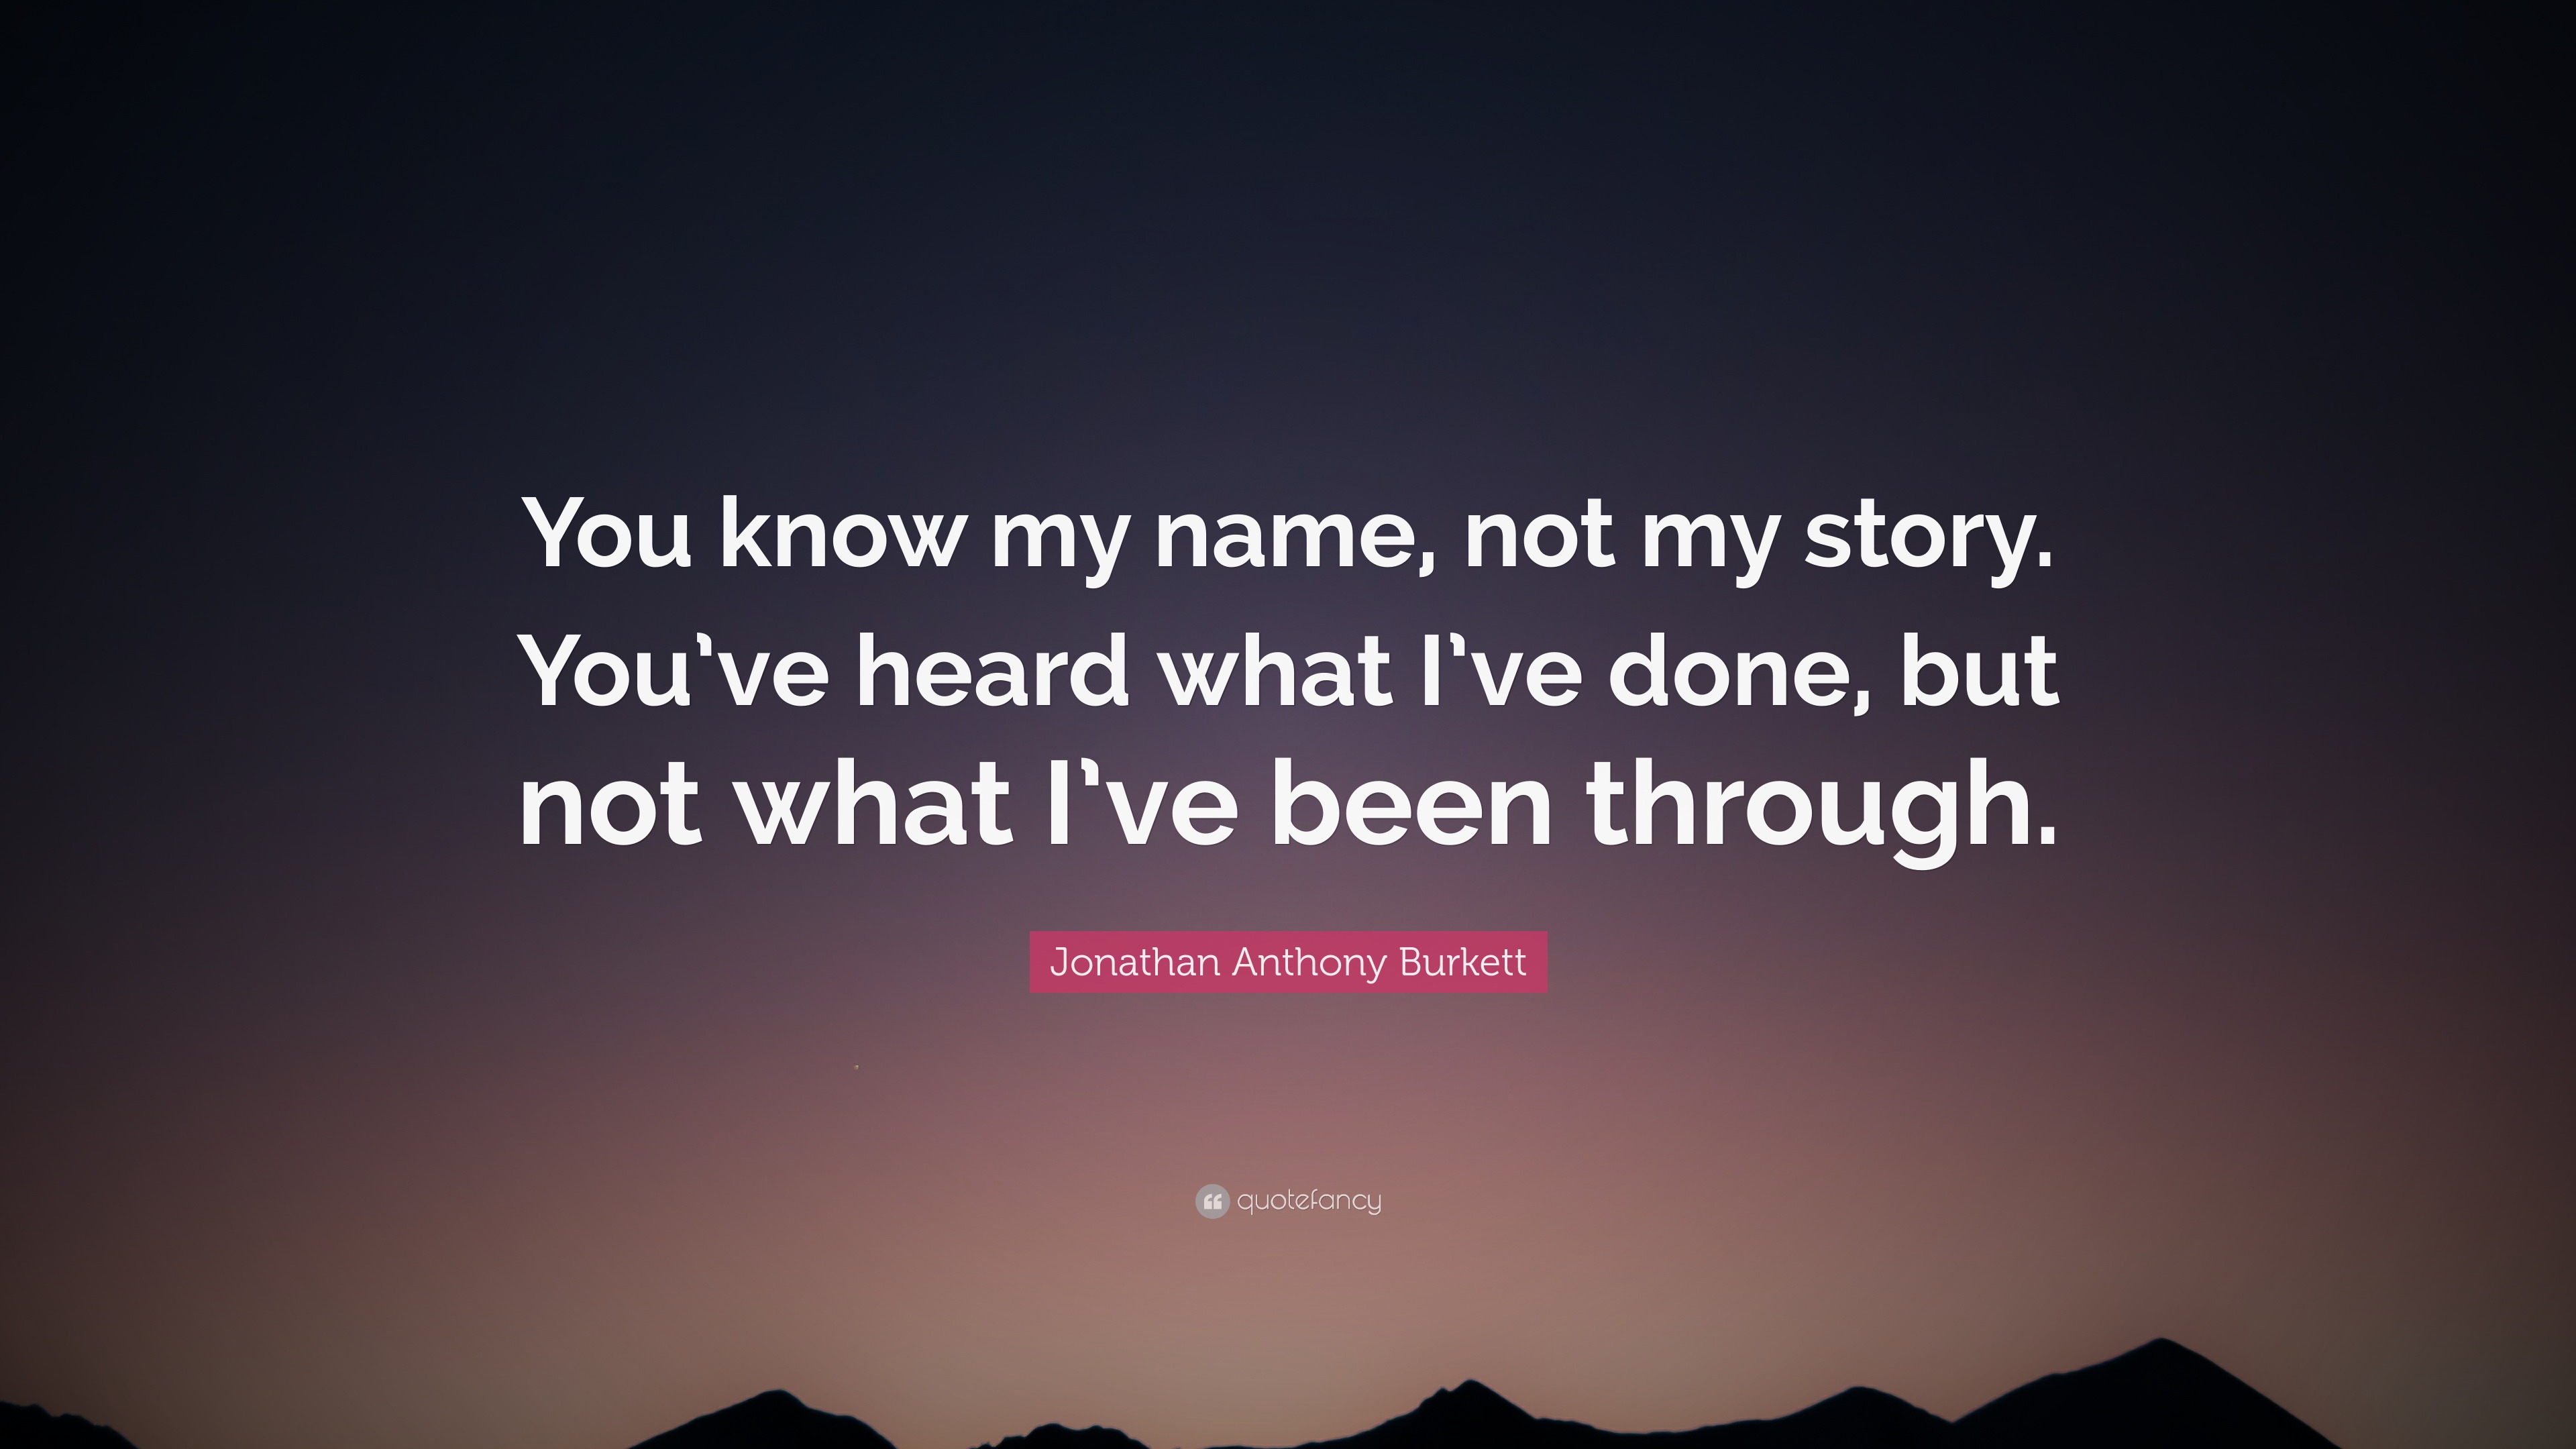 Jonathan Anthony Burkett Quote: “You know my name, not my story. You’ve